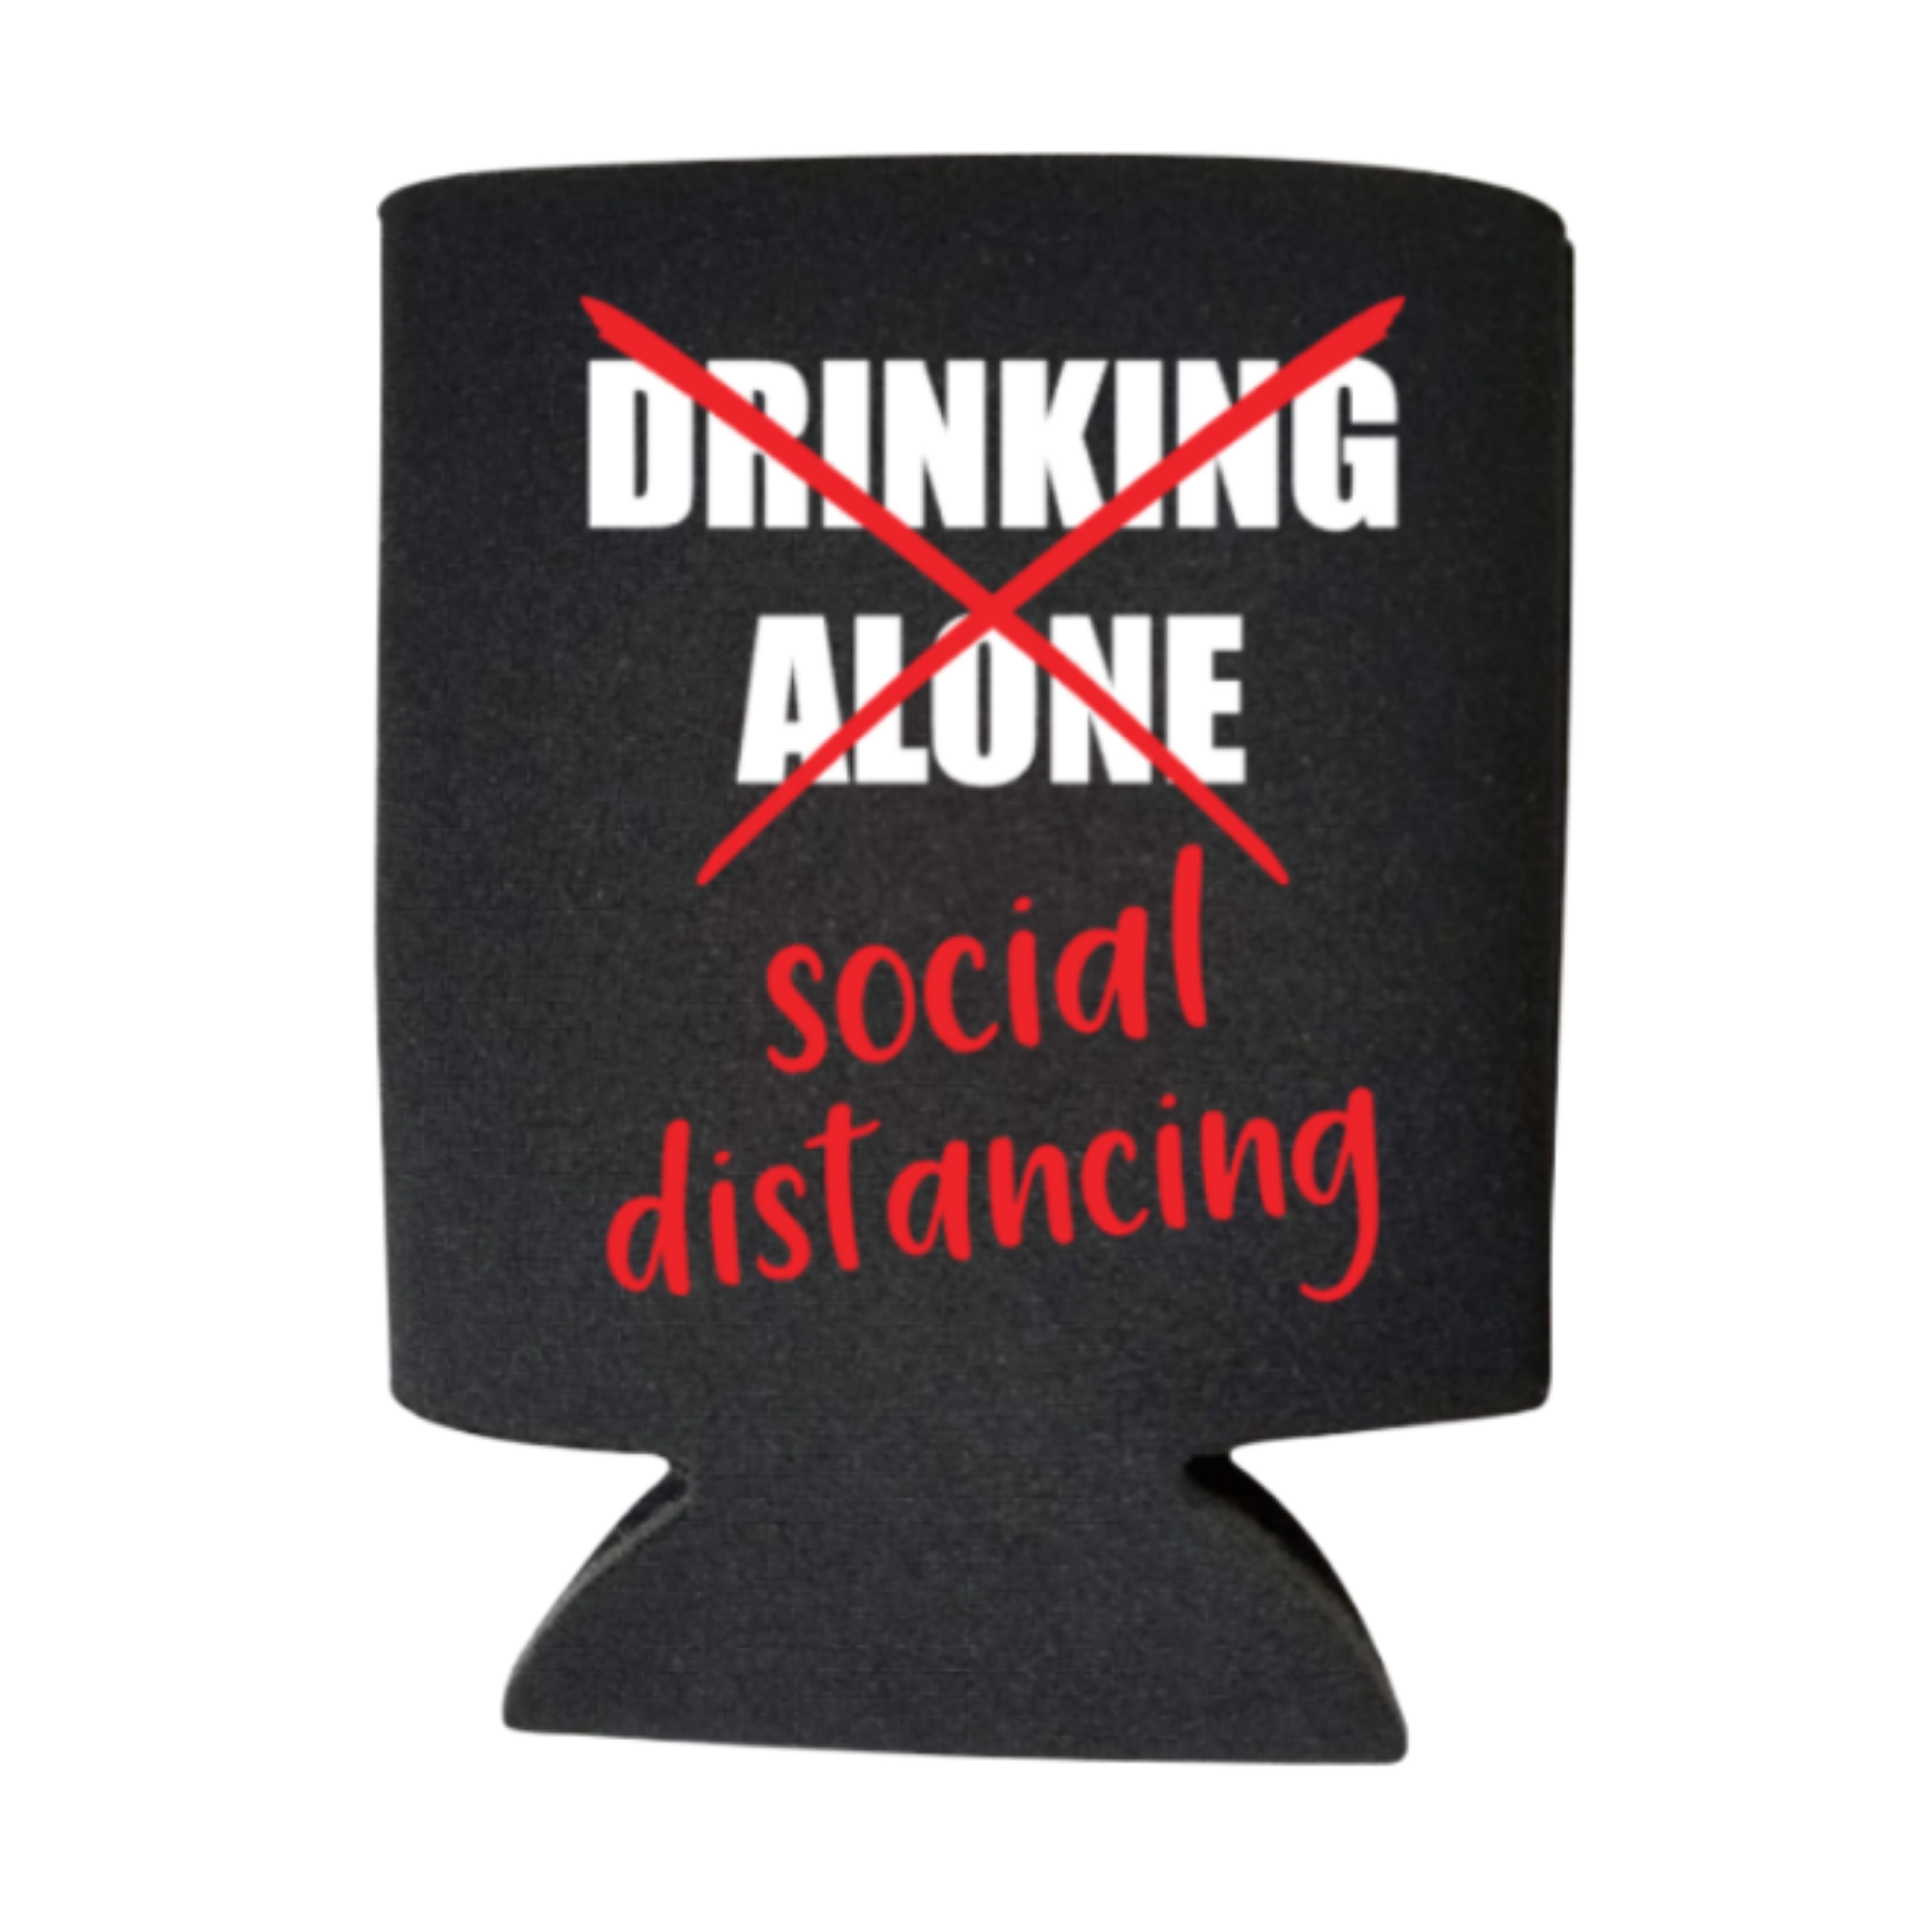 Details about   Funny Social Distancing Mug Its Not Drinking Alone If You Are Social Distancing 